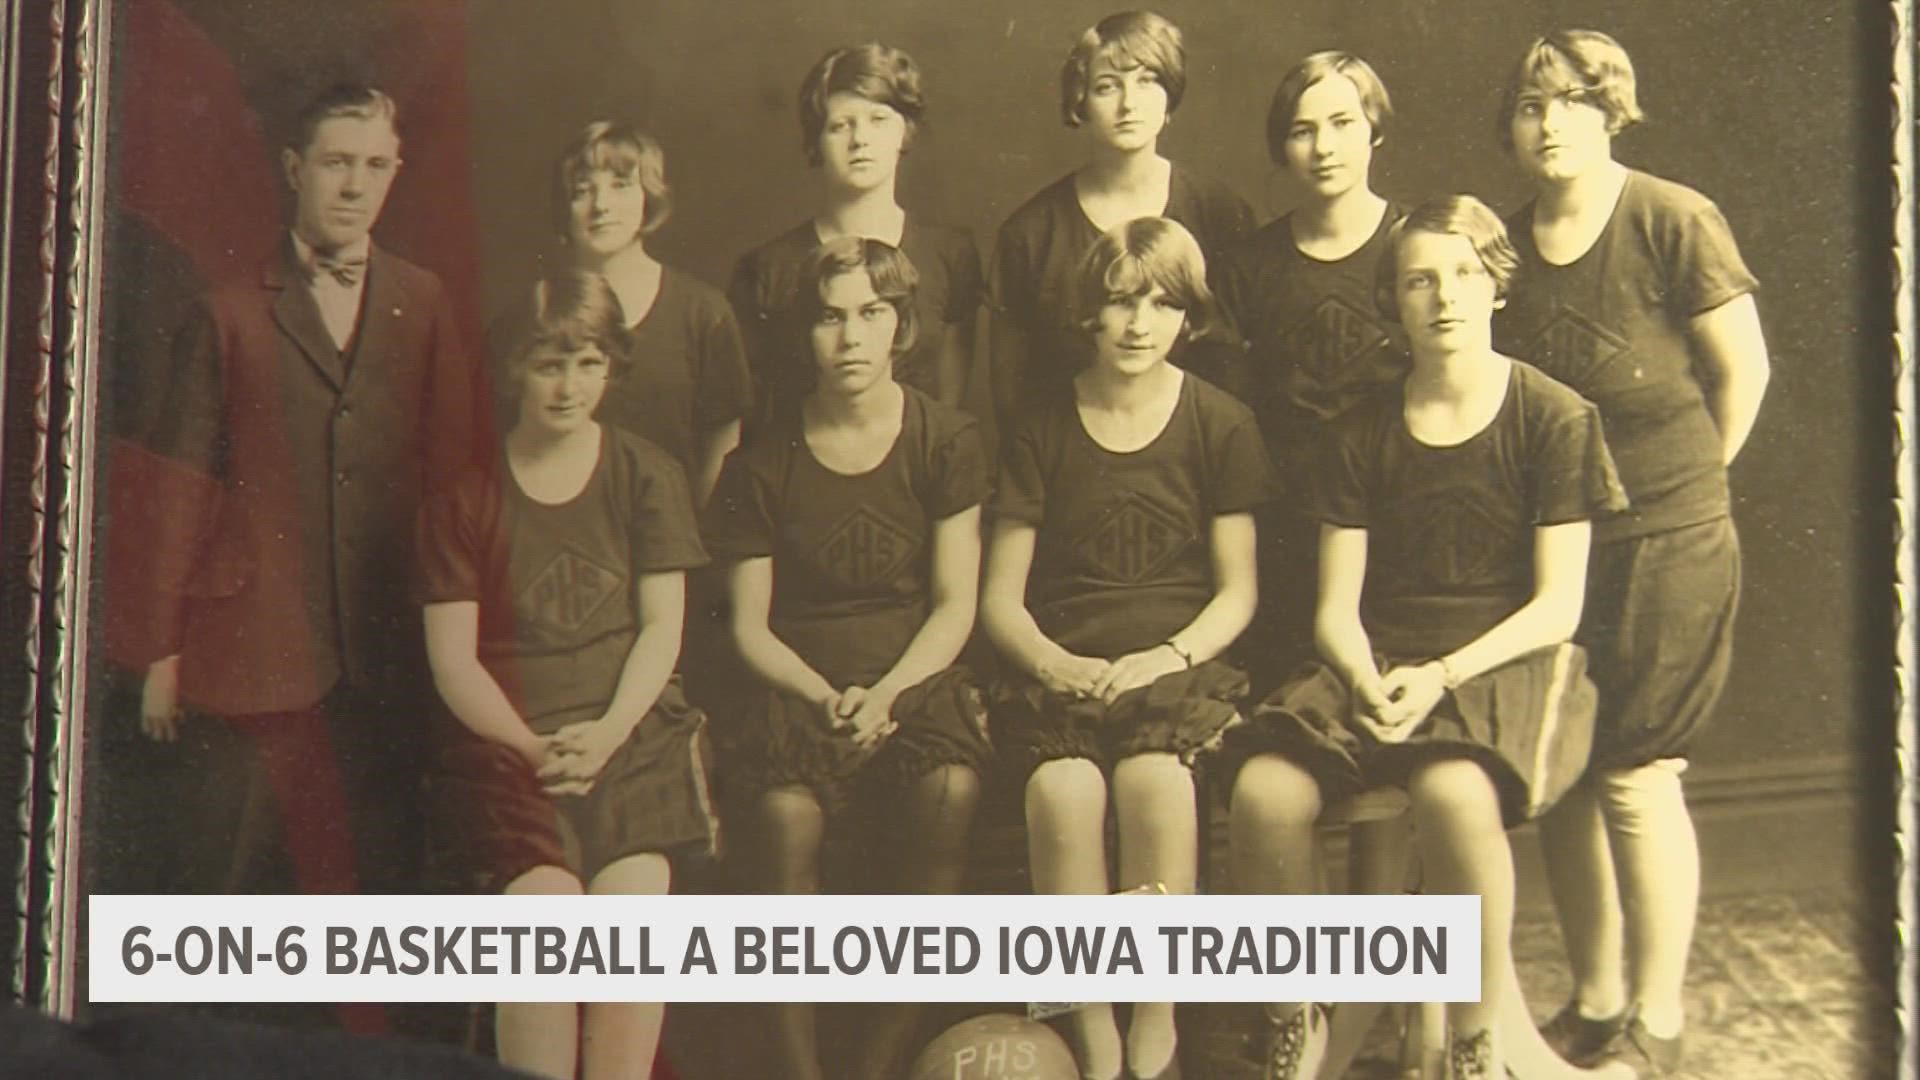 The final 6-on-6 basketball game in Iowa was played in 1993, after the introduction of Title IX inadvertently led to the game's downfall.